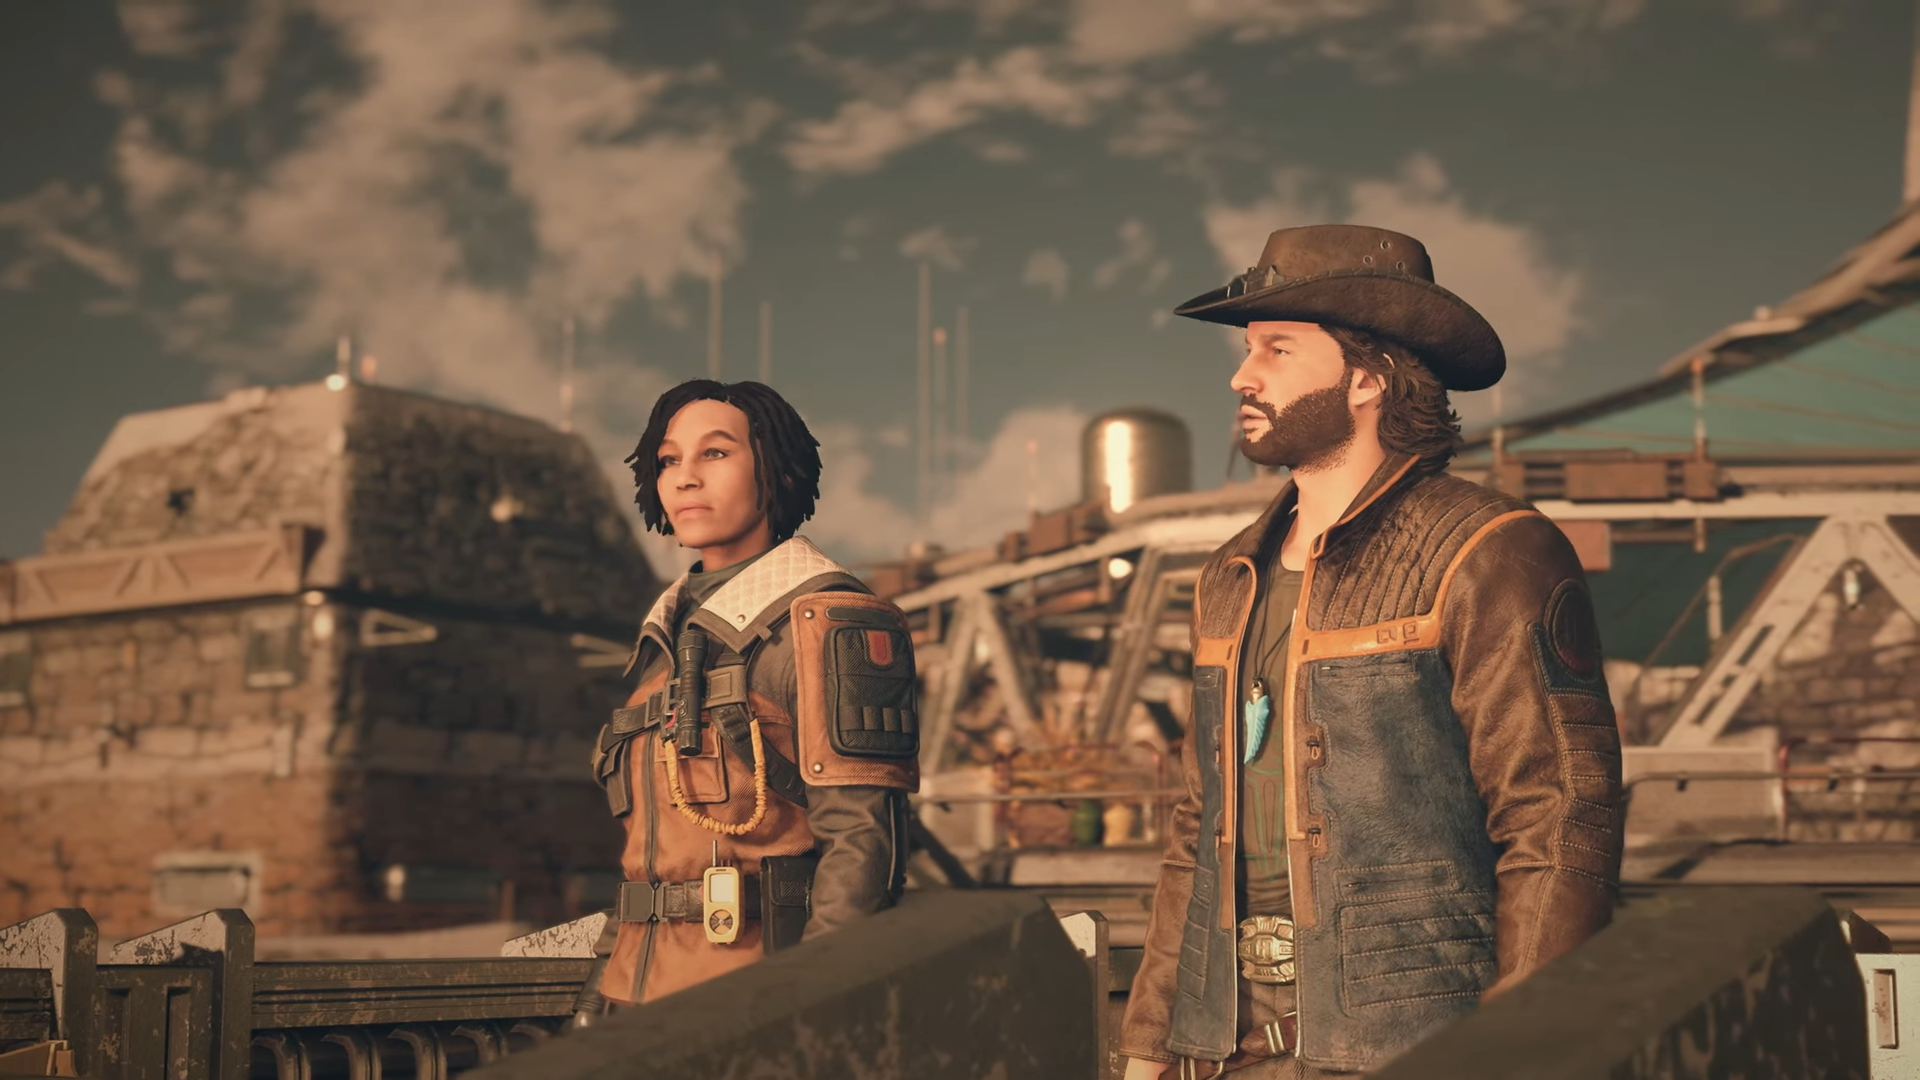 A romance scene between the player character and Sam Coe, a space cowboy, in Starfield.